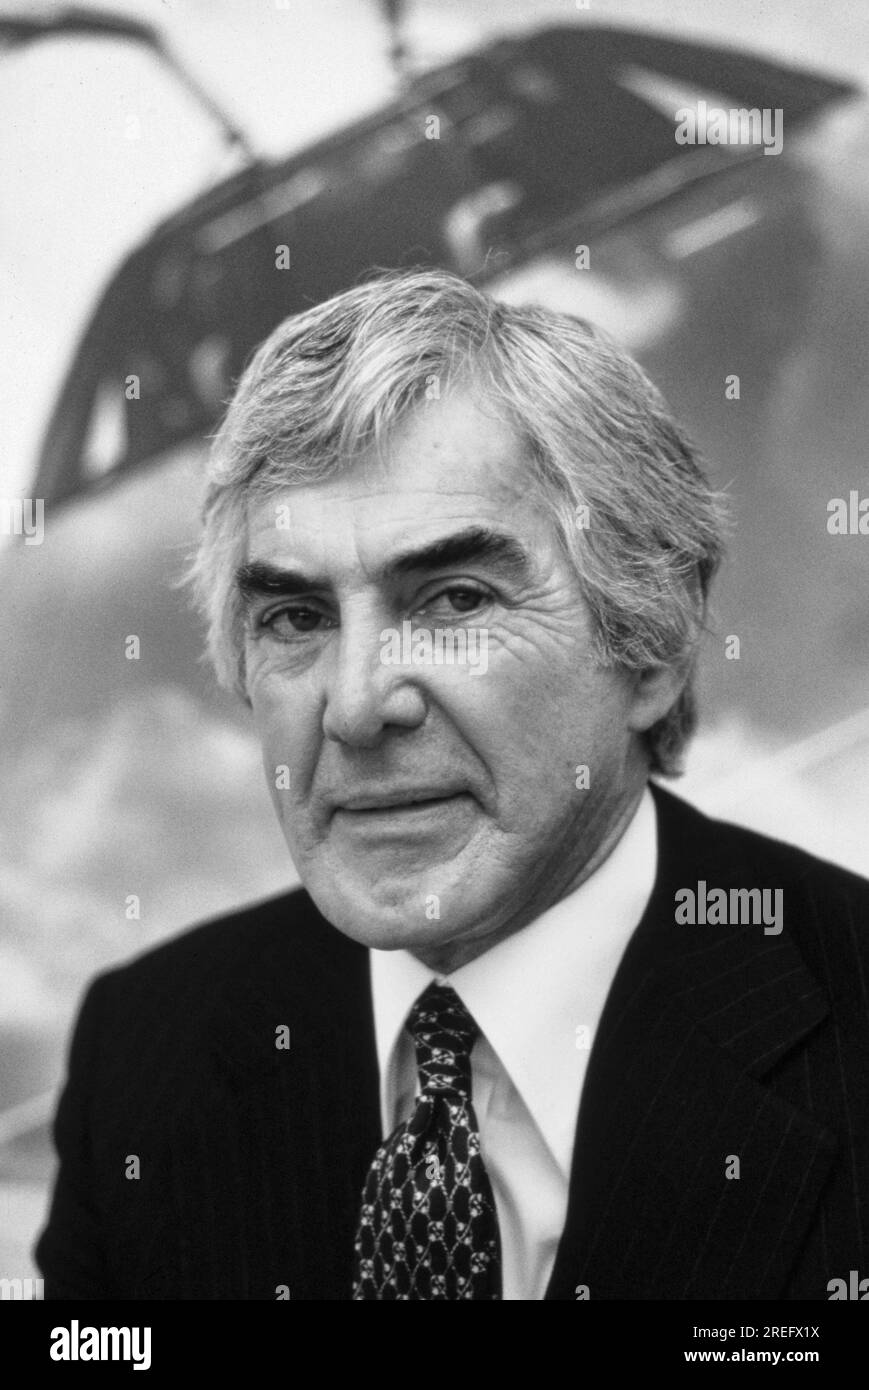 John DeLorean  was an American engineer, inventor, and executive in the U.S. automobile industry. He is widely known as founder of the DeLorean Motor Company, as well as for his work at General Motors.  DeLorean managed the development of a number of vehicles throughout his career, including the Pontiac GTO muscle car, the Pontiac Firebird, Pontiac Grand Prix, Chevrolet Cosworth Vega, and the DMC DeLorean sports car, which was featured in the 1985 film Back to the Future. In October 1982, DeLorean was charged with cocaine trafficking but later found not guitly. Photograph by Bernard Gotfryd Stock Photo